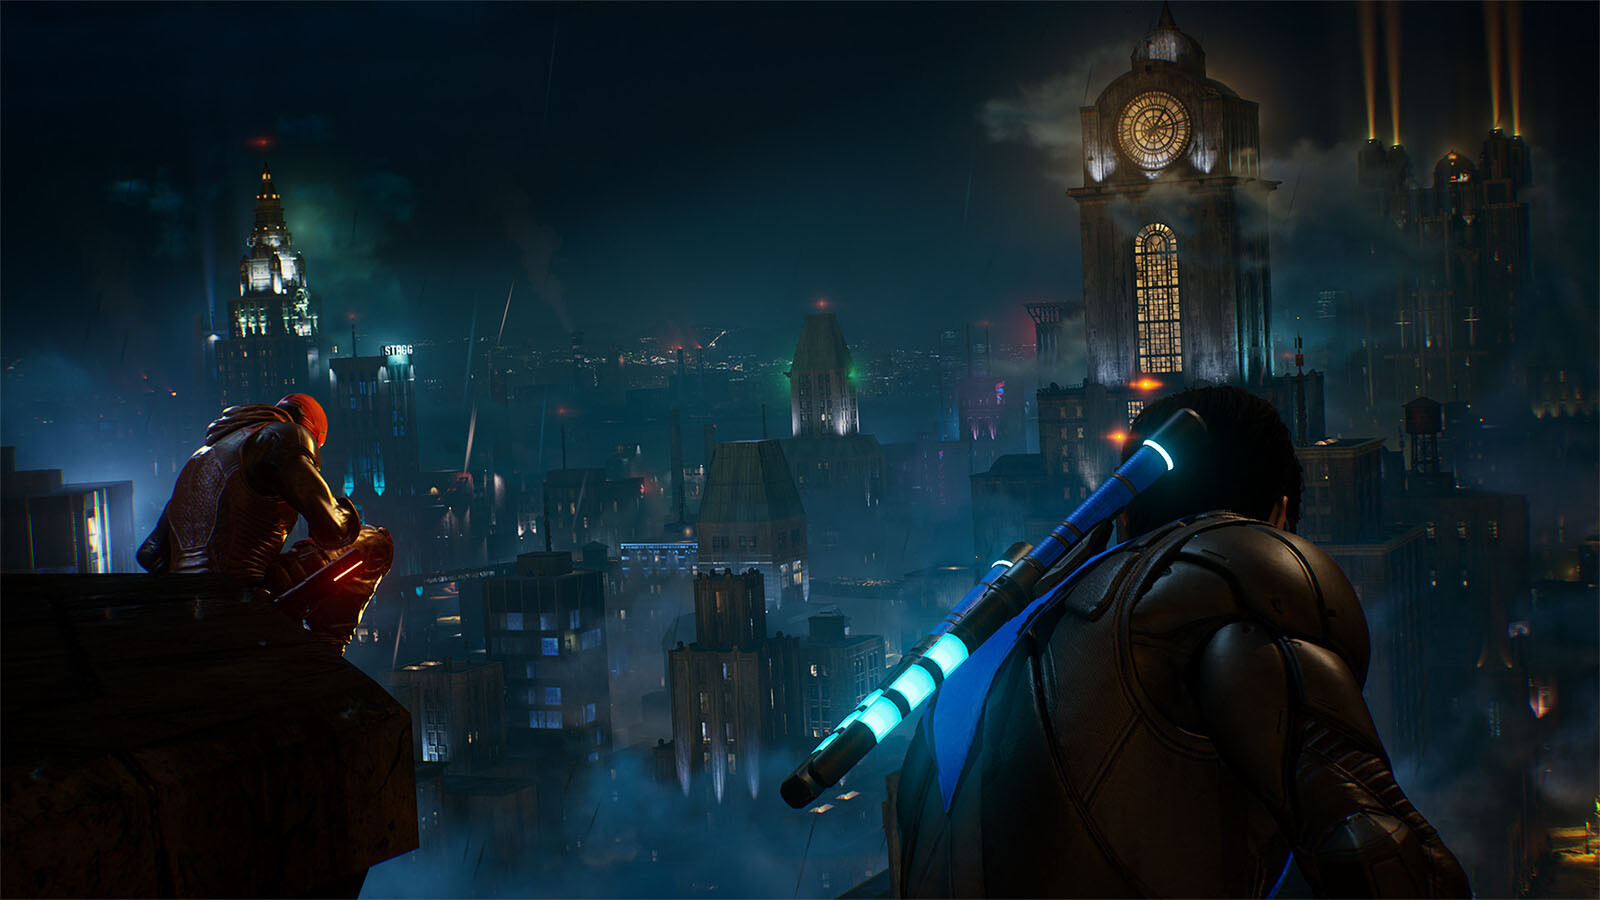 Gotham Knights: Deluxe, PC Steam Game